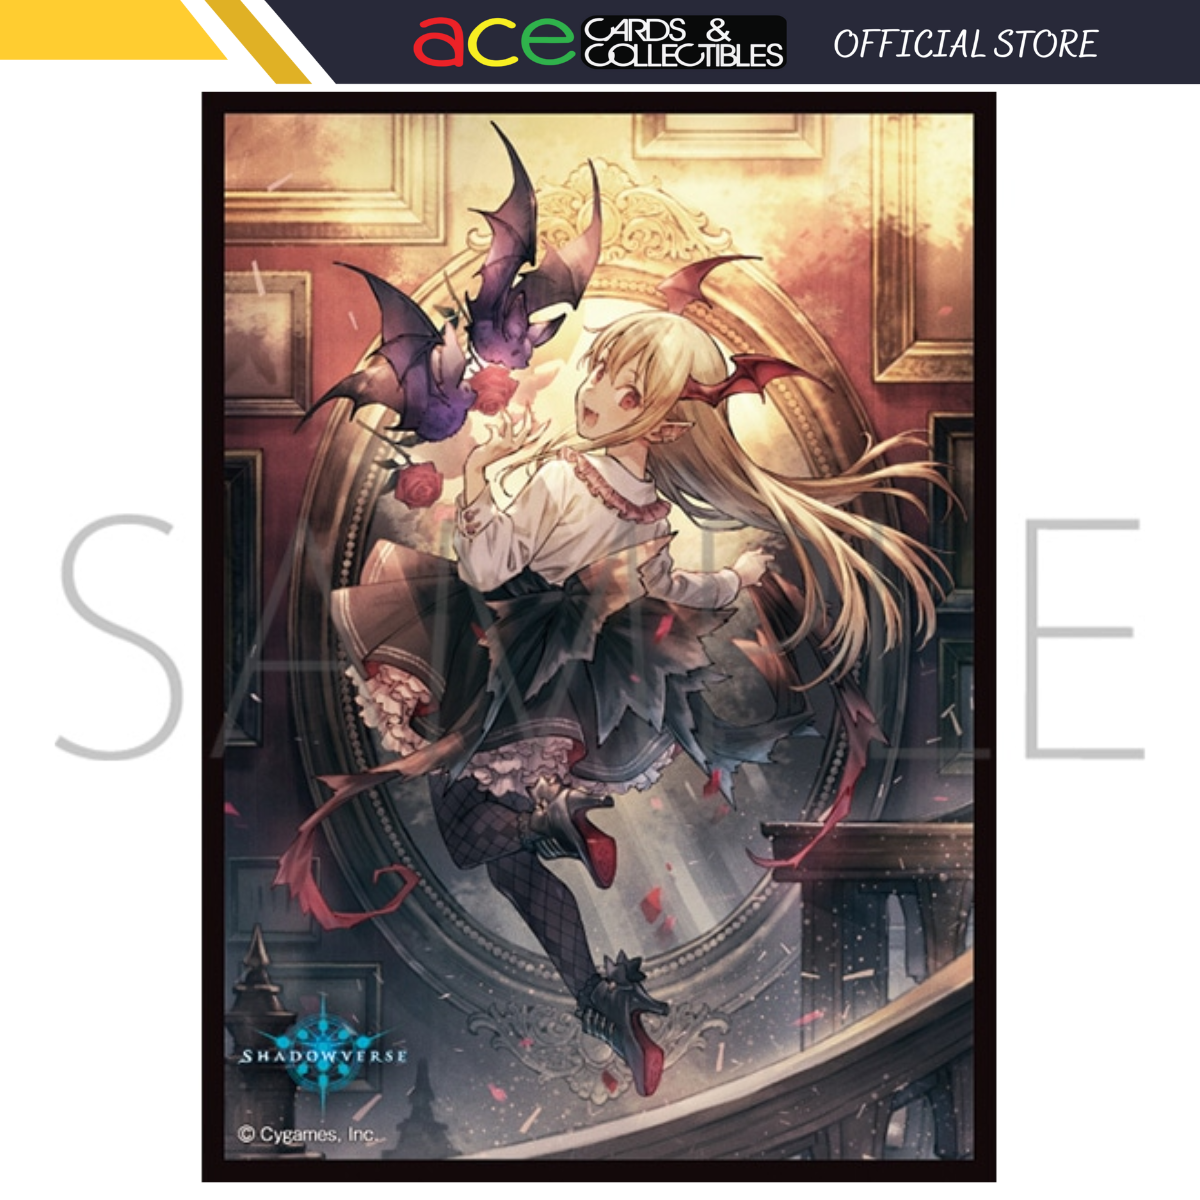 Shadowverse Chara Sleeve Collection Matte Series (MT1471) "Vania,Crimson Majesty"-Movic-Ace Cards & Collectibles